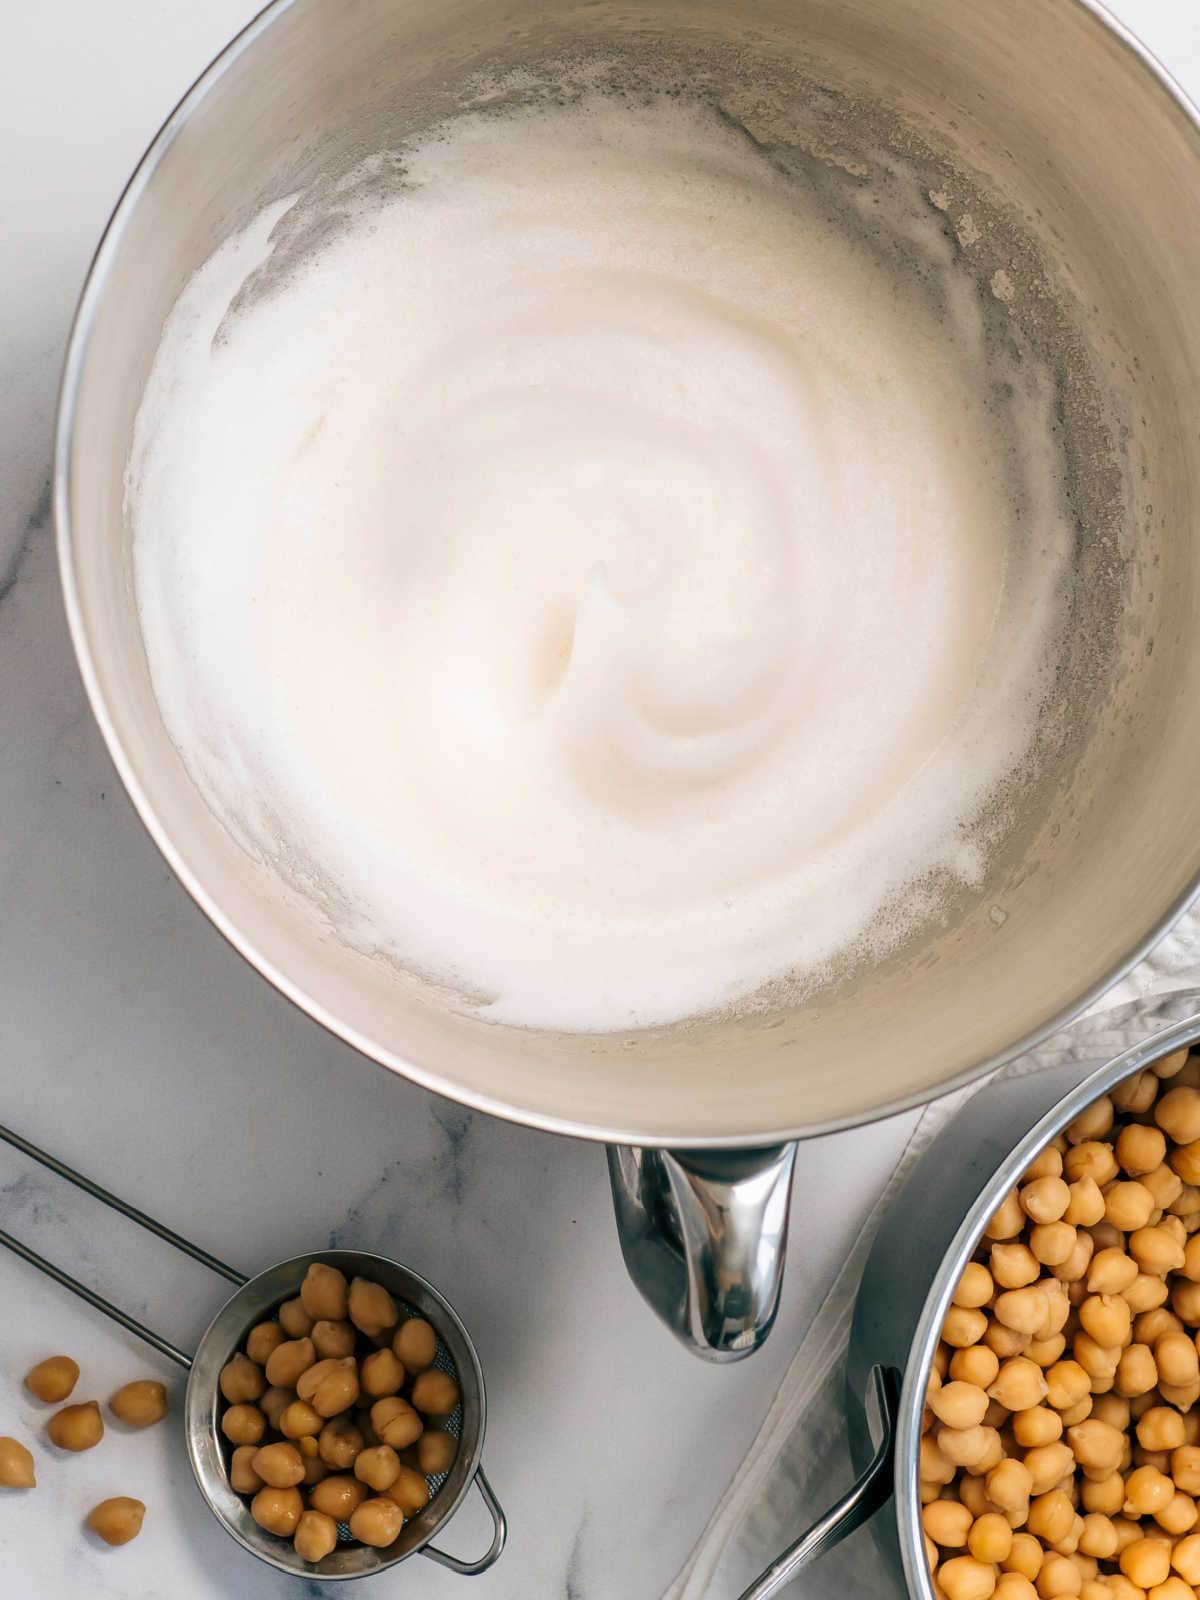 whipped aquafaba in a mixing bowl with cooked chickpeas next to it